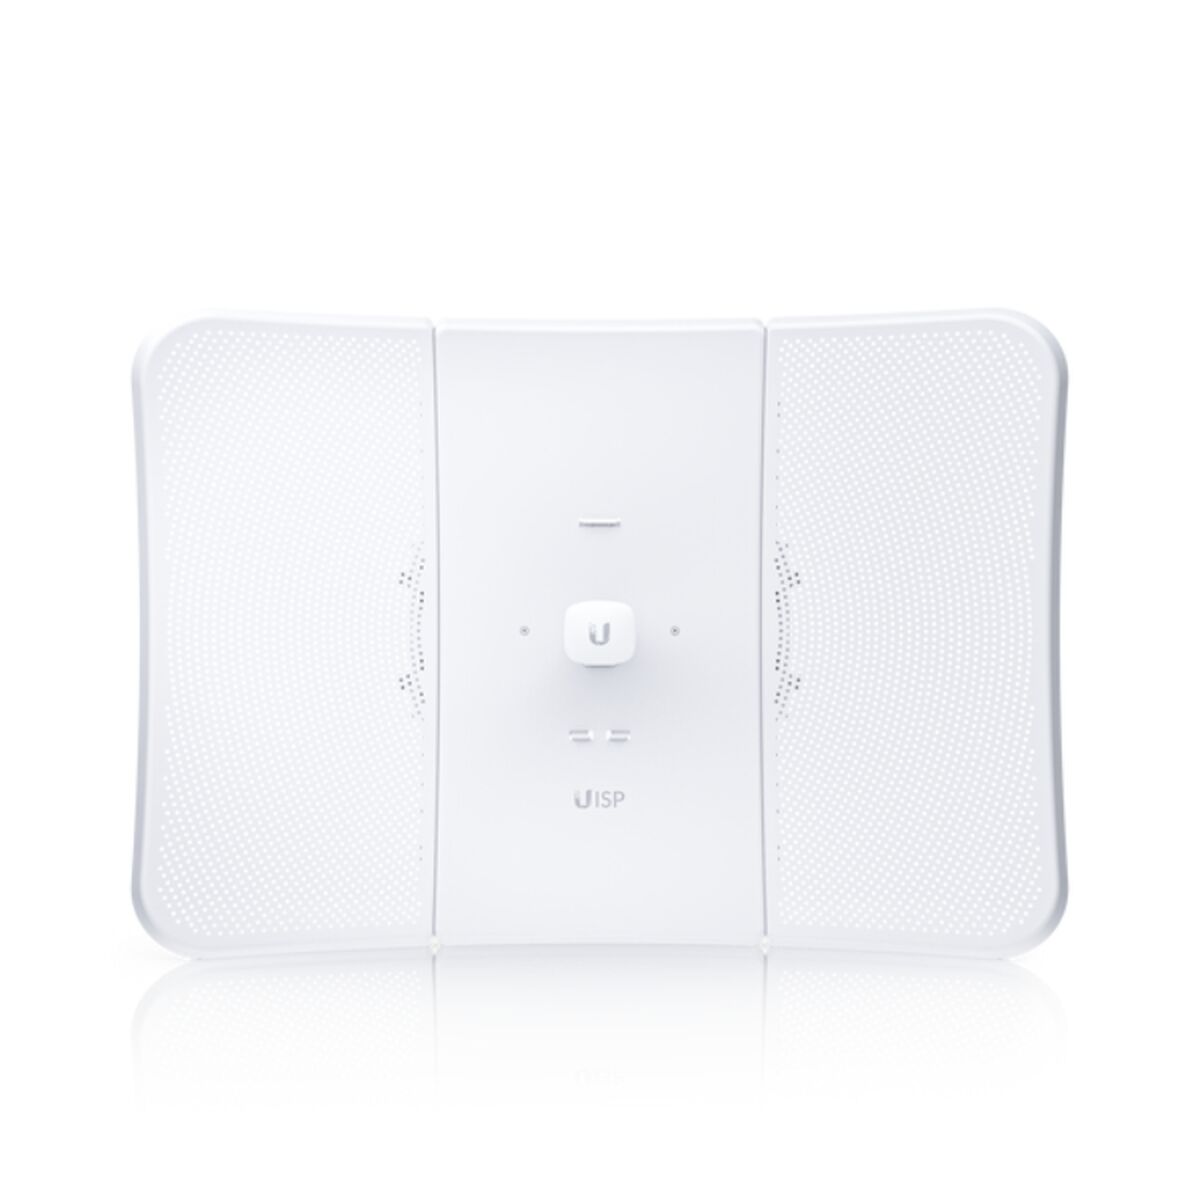 Access point UBIQUITI LBE-5AC-XR White, UBIQUITI, Computing, Network devices, access-point-ubiquiti-lbe-5ac-xr-white, Brand_UBIQUITI, category-reference-2609, category-reference-2803, category-reference-2820, category-reference-t-19685, category-reference-t-19914, Condition_NEW, networks/wiring, Price_200 - 300, Teleworking, RiotNook